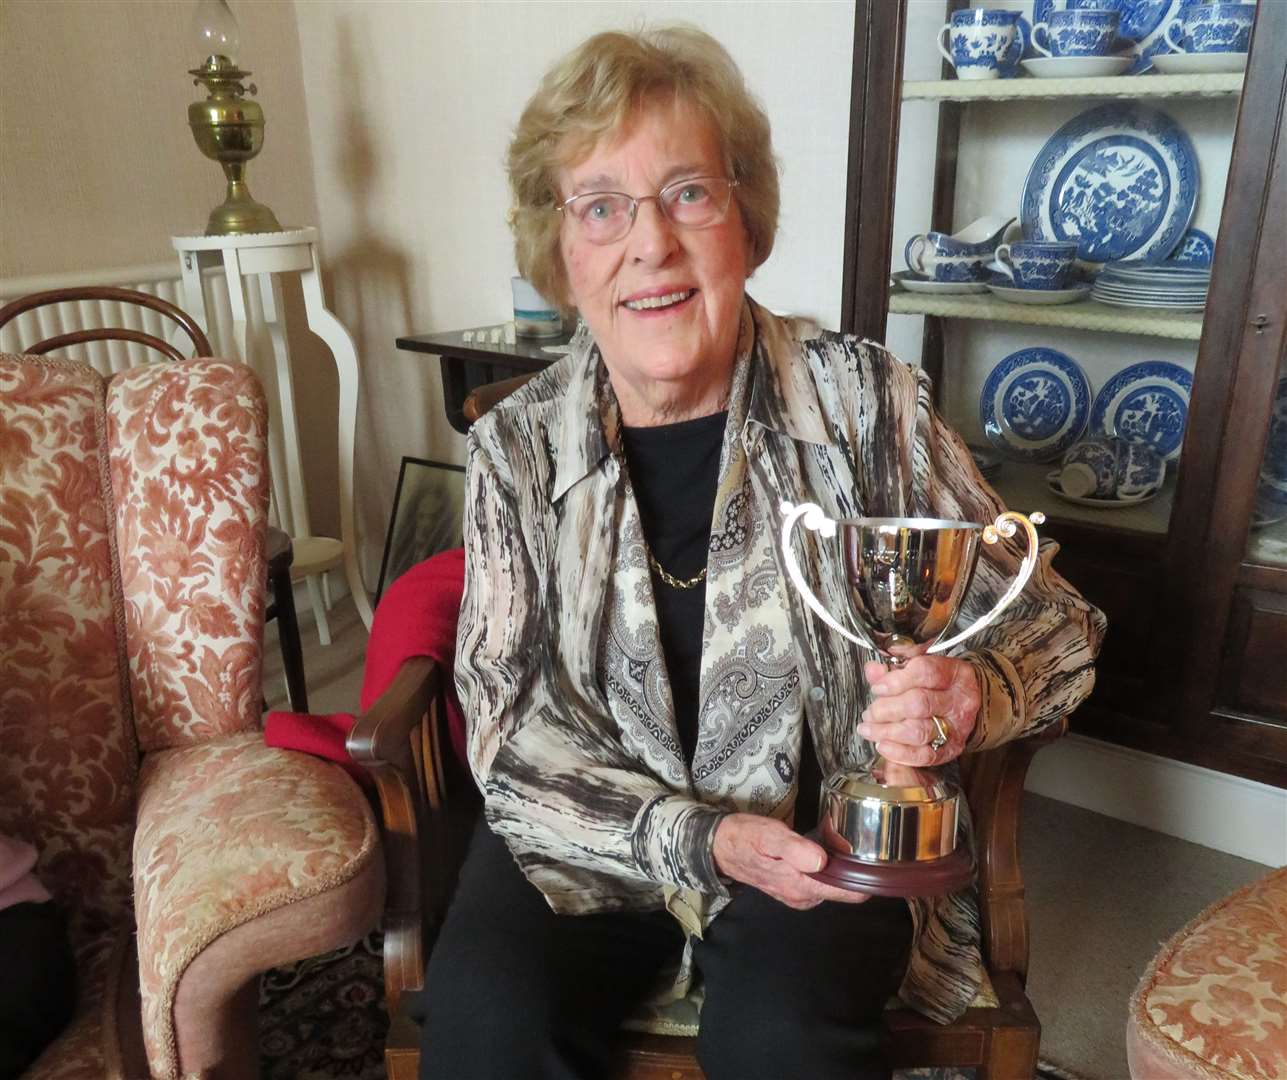 Jeanette Johnston with the trophy in memory of her husband Hugh.